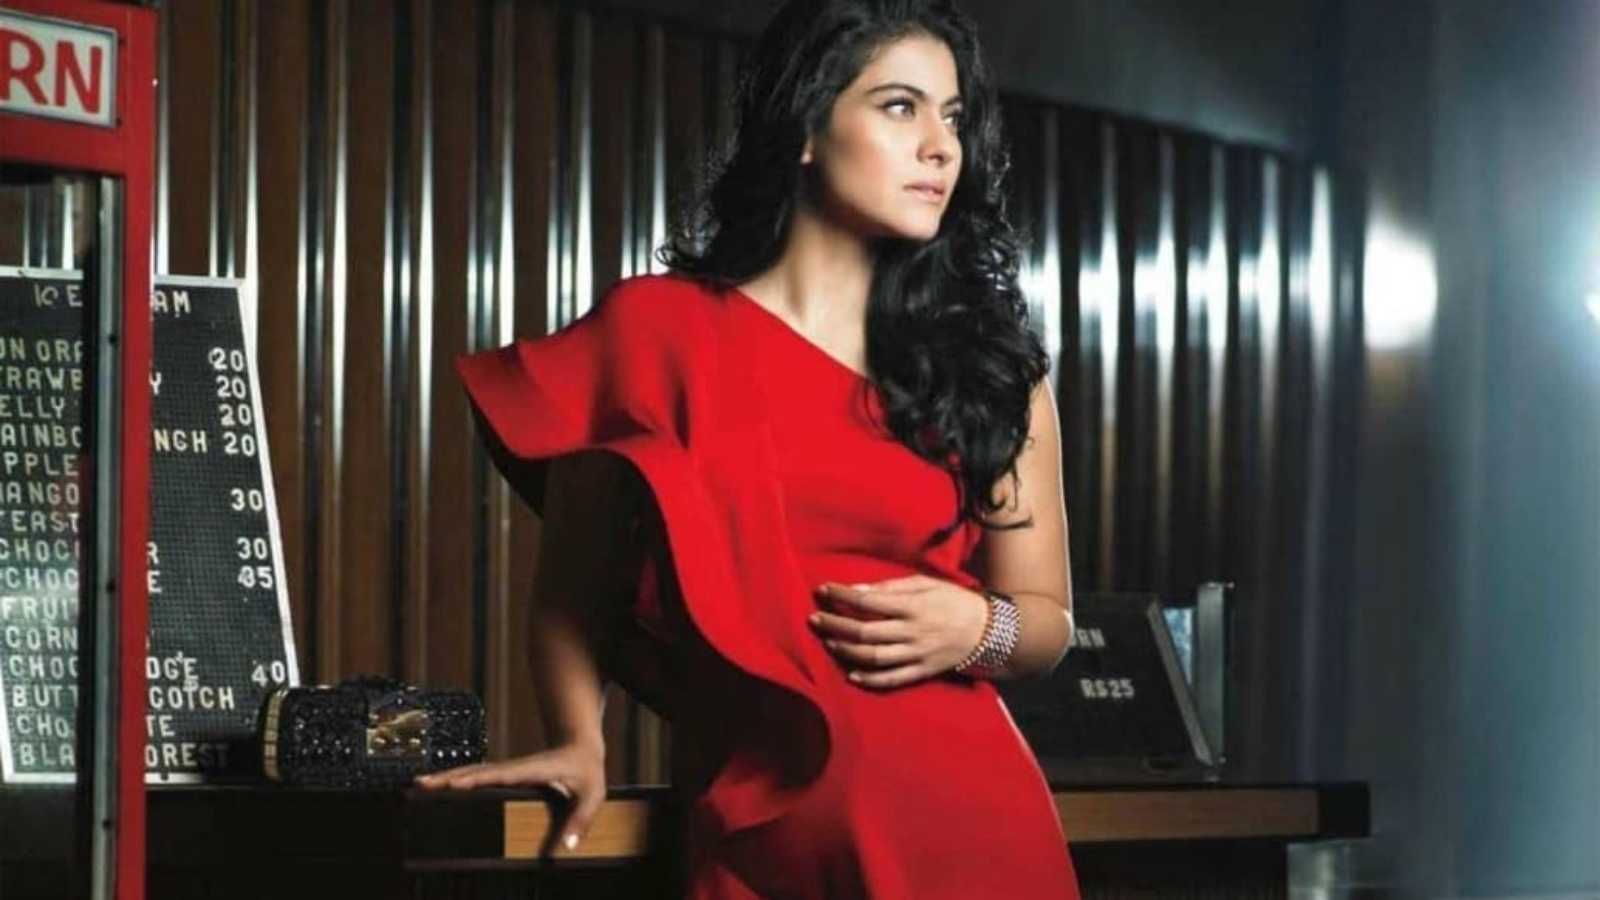 Kajol charging a films worth of fee per episode of her debut web series; This is how many crores shes charging